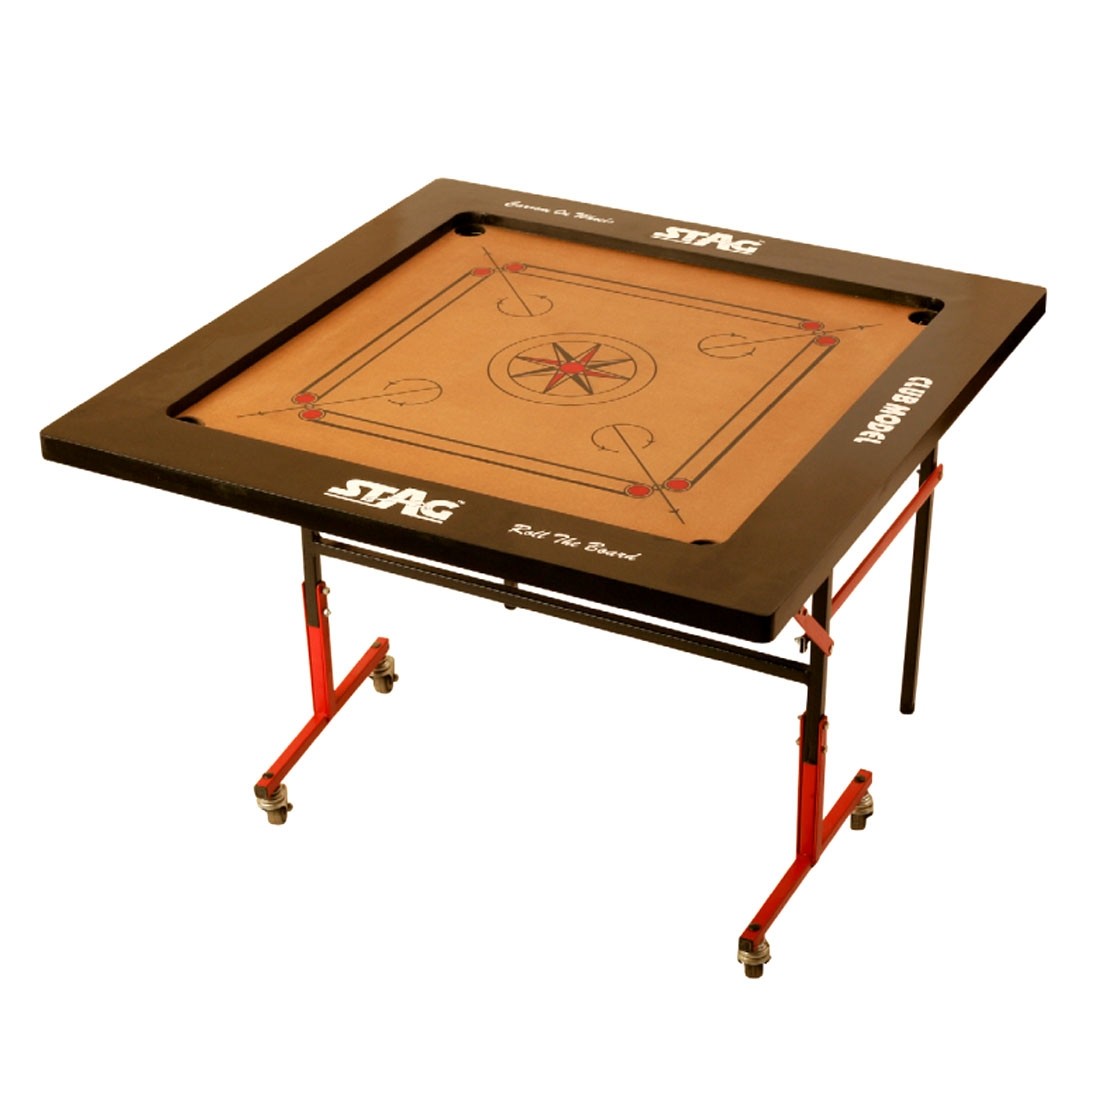 STAG CARROM BOARD CLUB 4" BORDER 6MM M.D.F. WITH LOW STAND